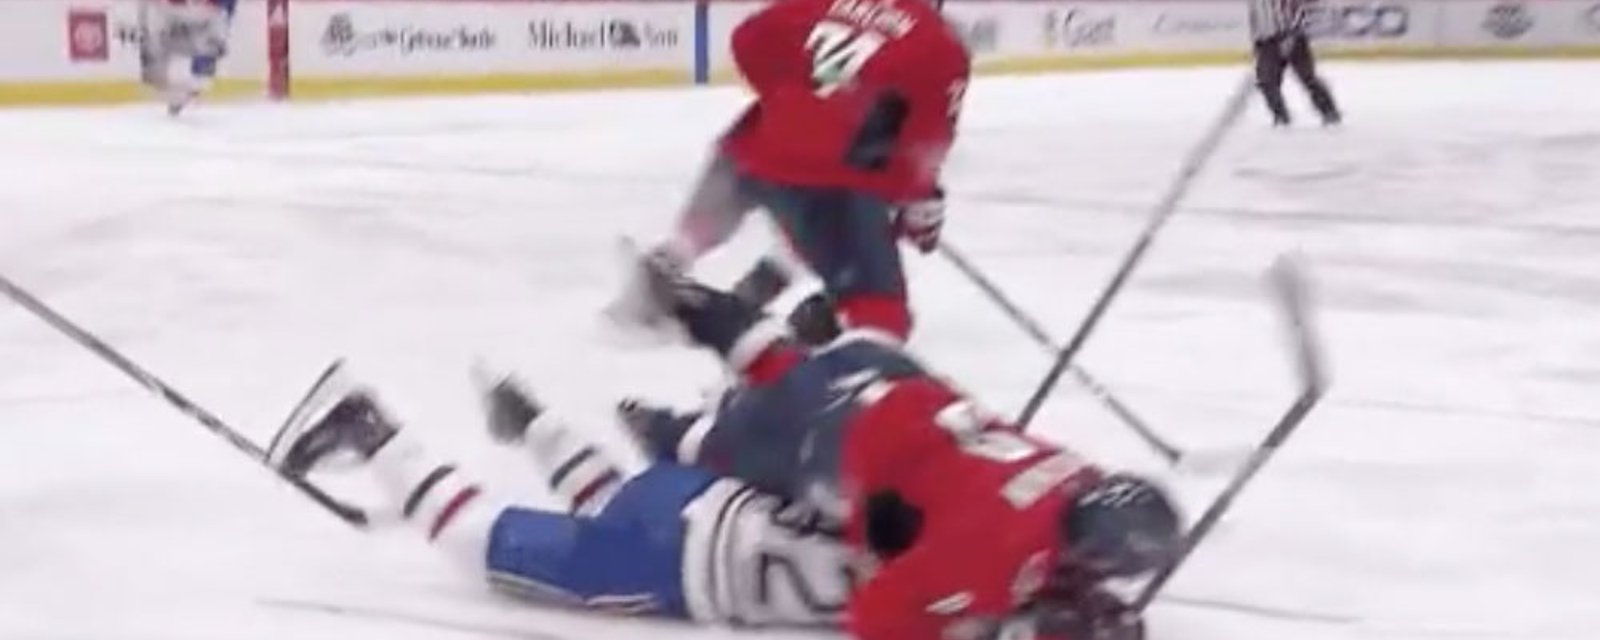 Ovechkin destroys Drouin and sends him badly injured to dressing room 